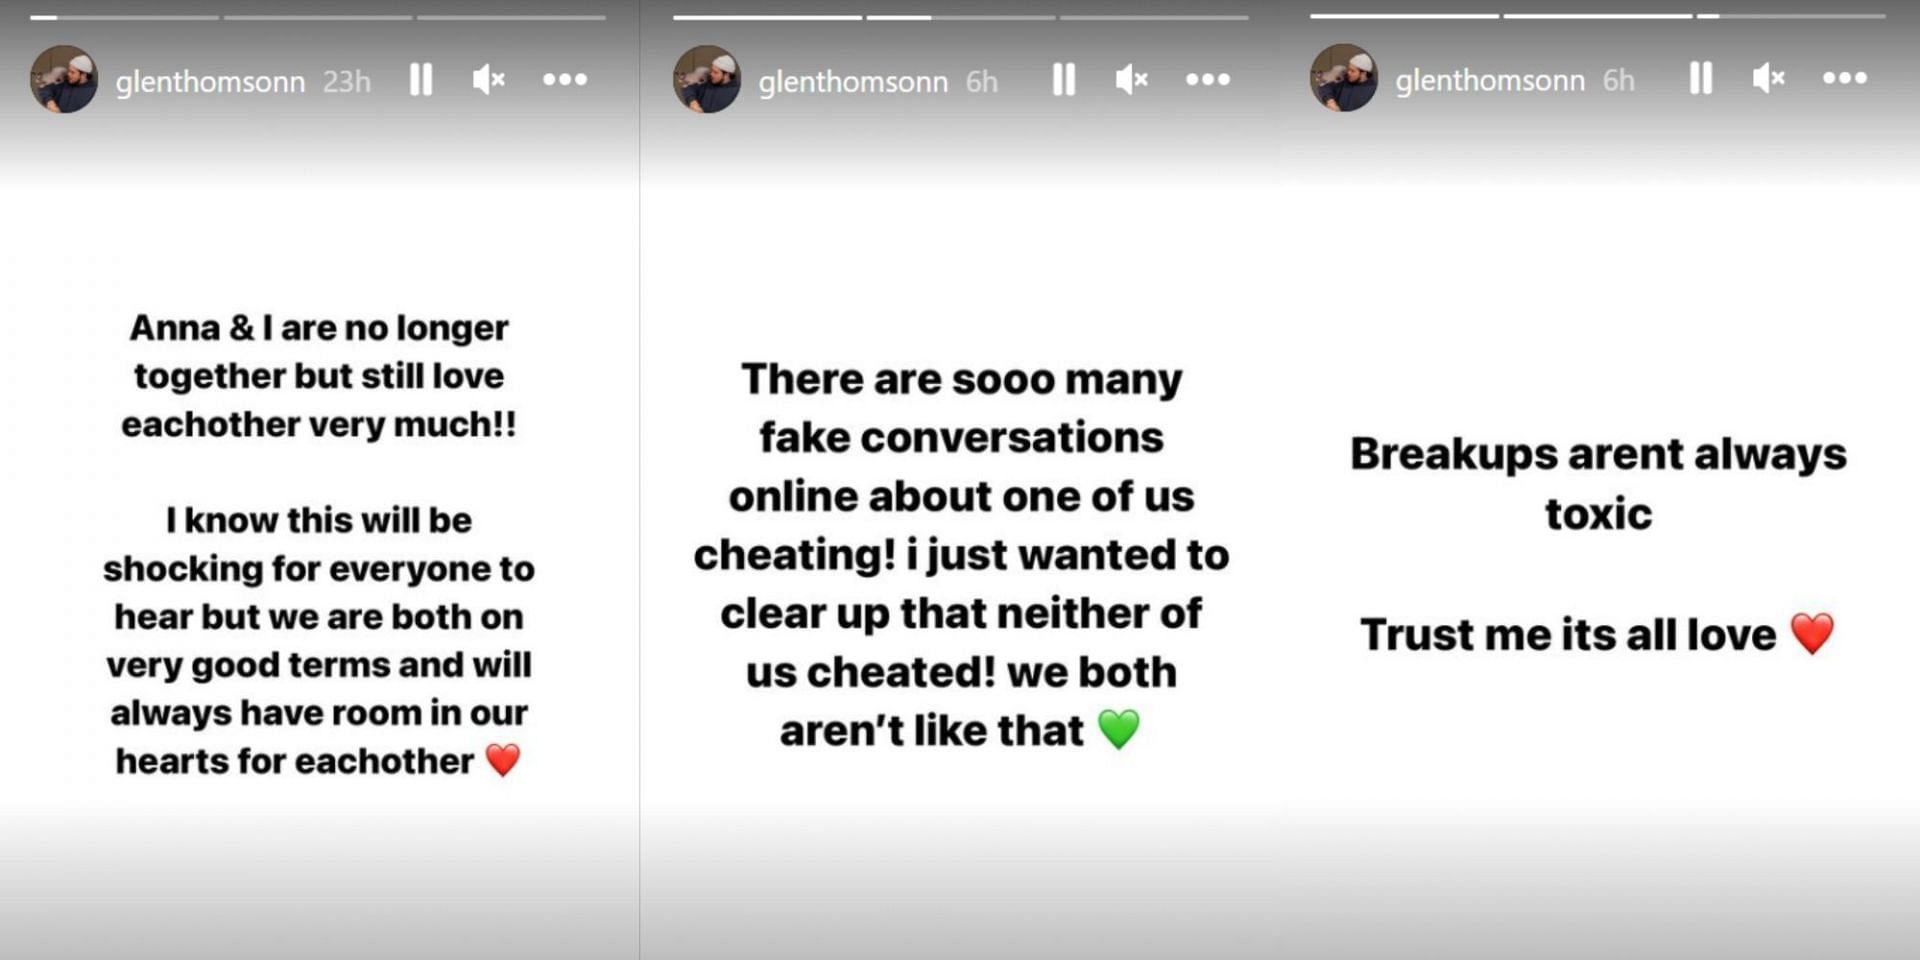 Glen Thomson&#039;s Instagram stories about his and Anna Paul&#039;s mutual breakup. (Image via Instagram/@glenthomsonn)